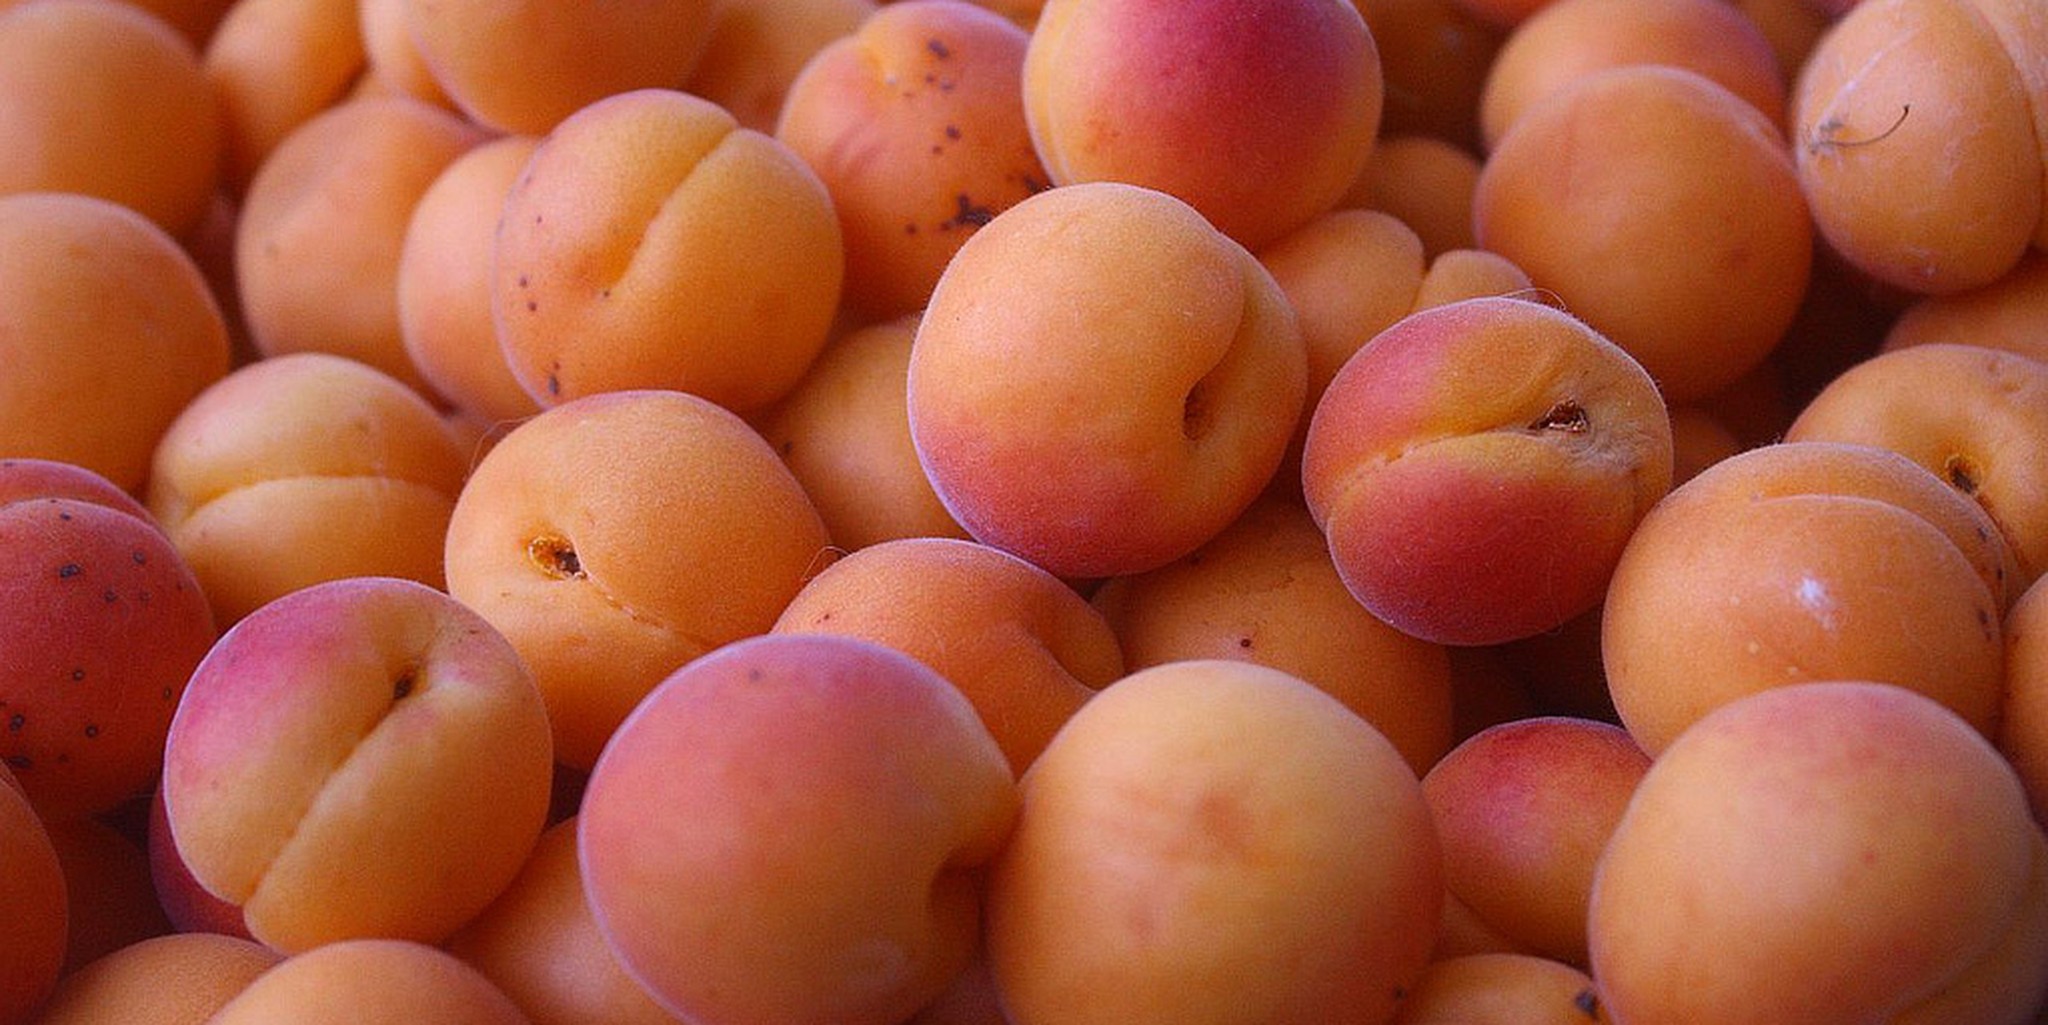 Whole Foods is trying to poison people with apricot kernels | The ...